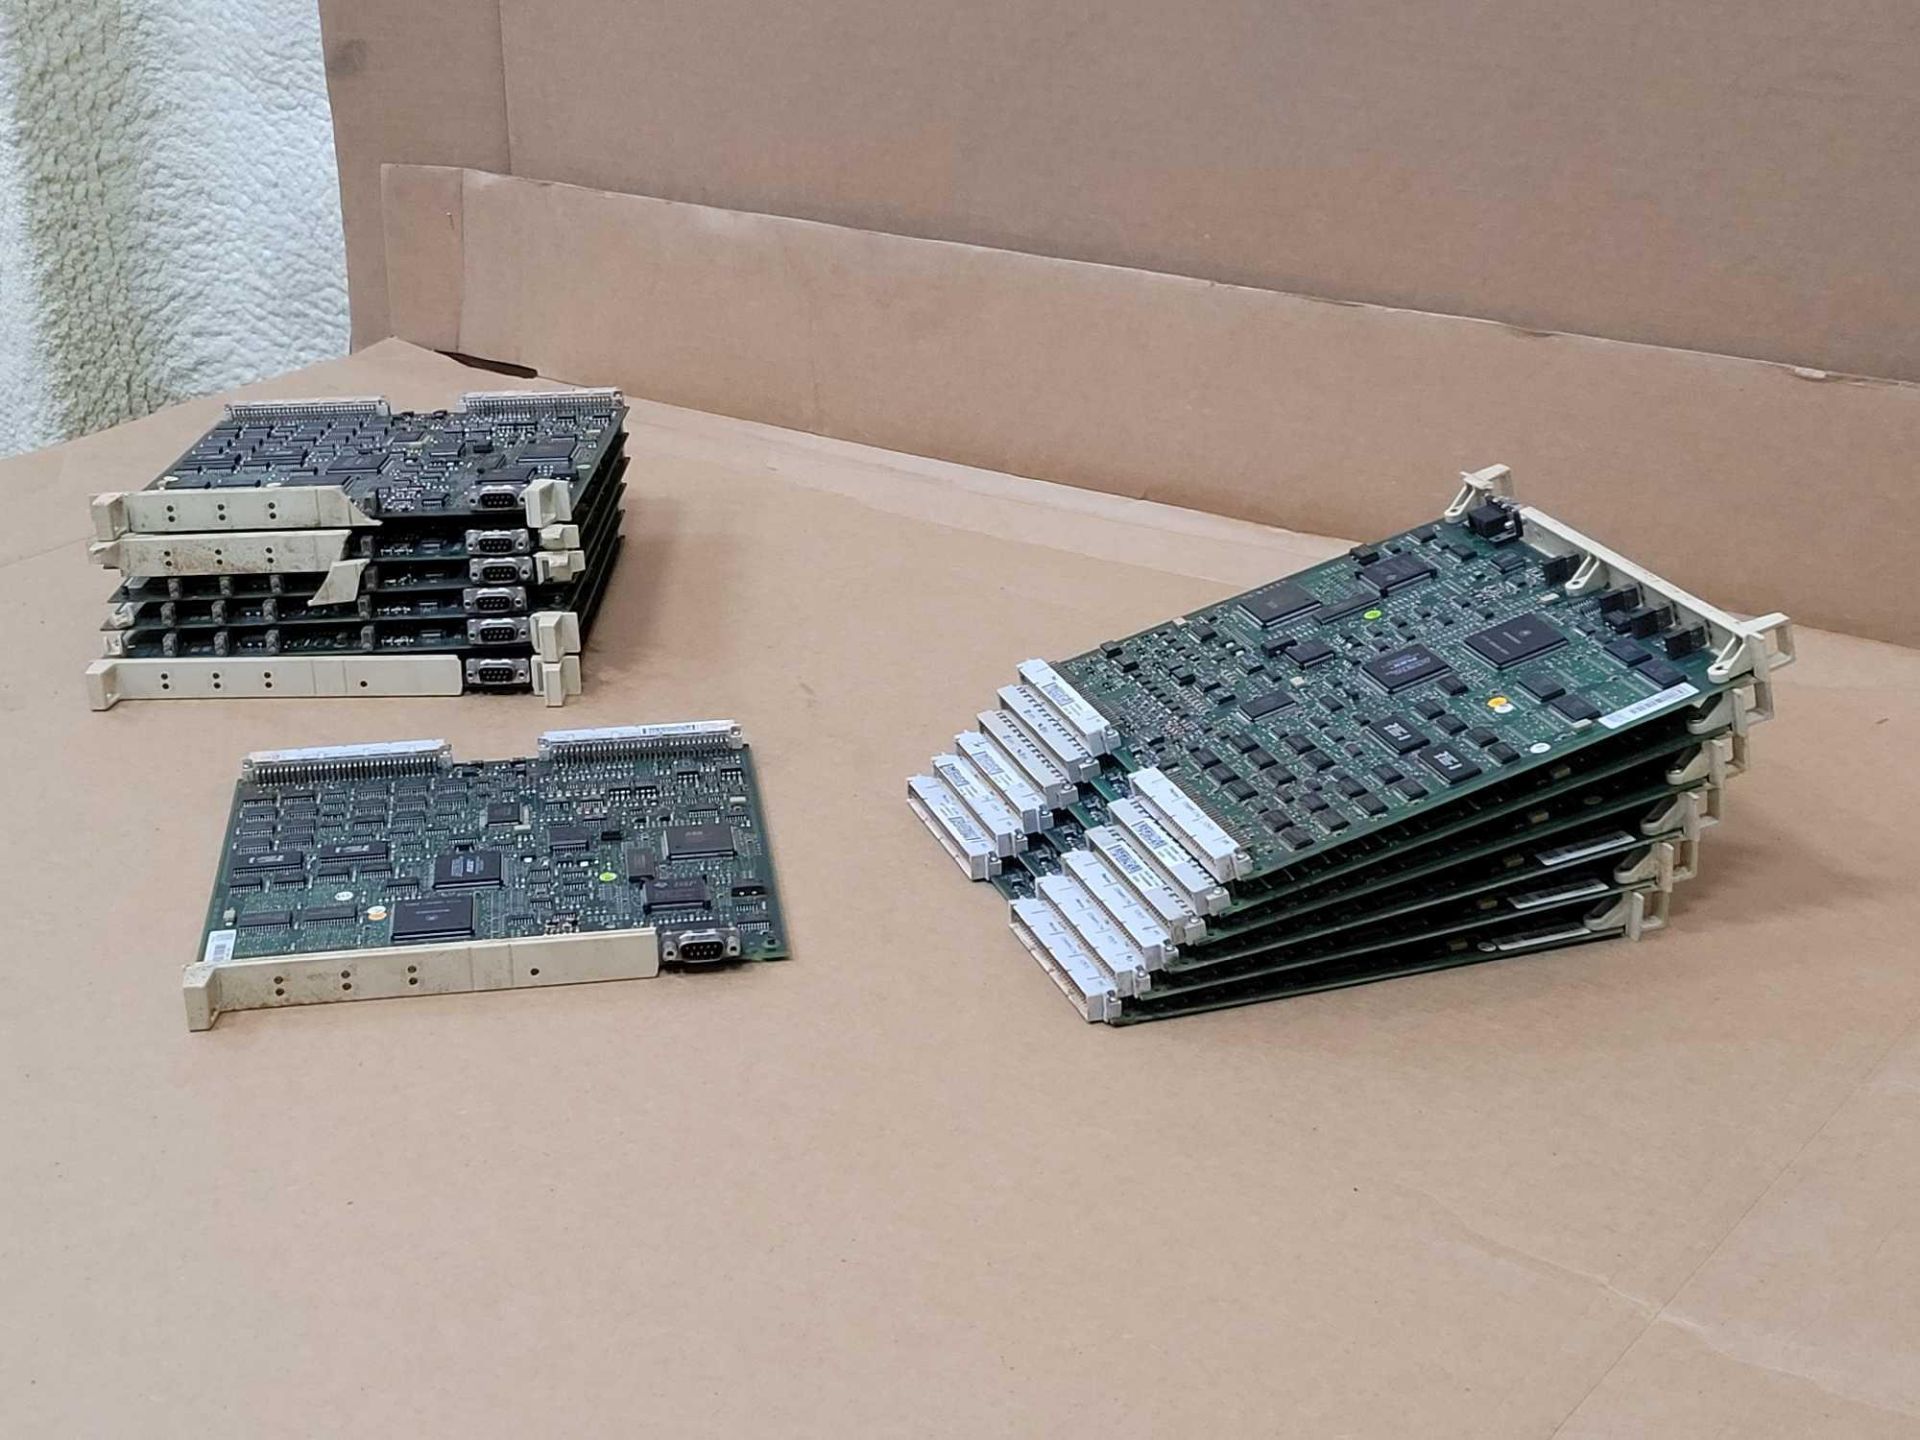 LOT OF 13 ABB 3BSC 980 006 R270 CPU BOARD - Image 3 of 5